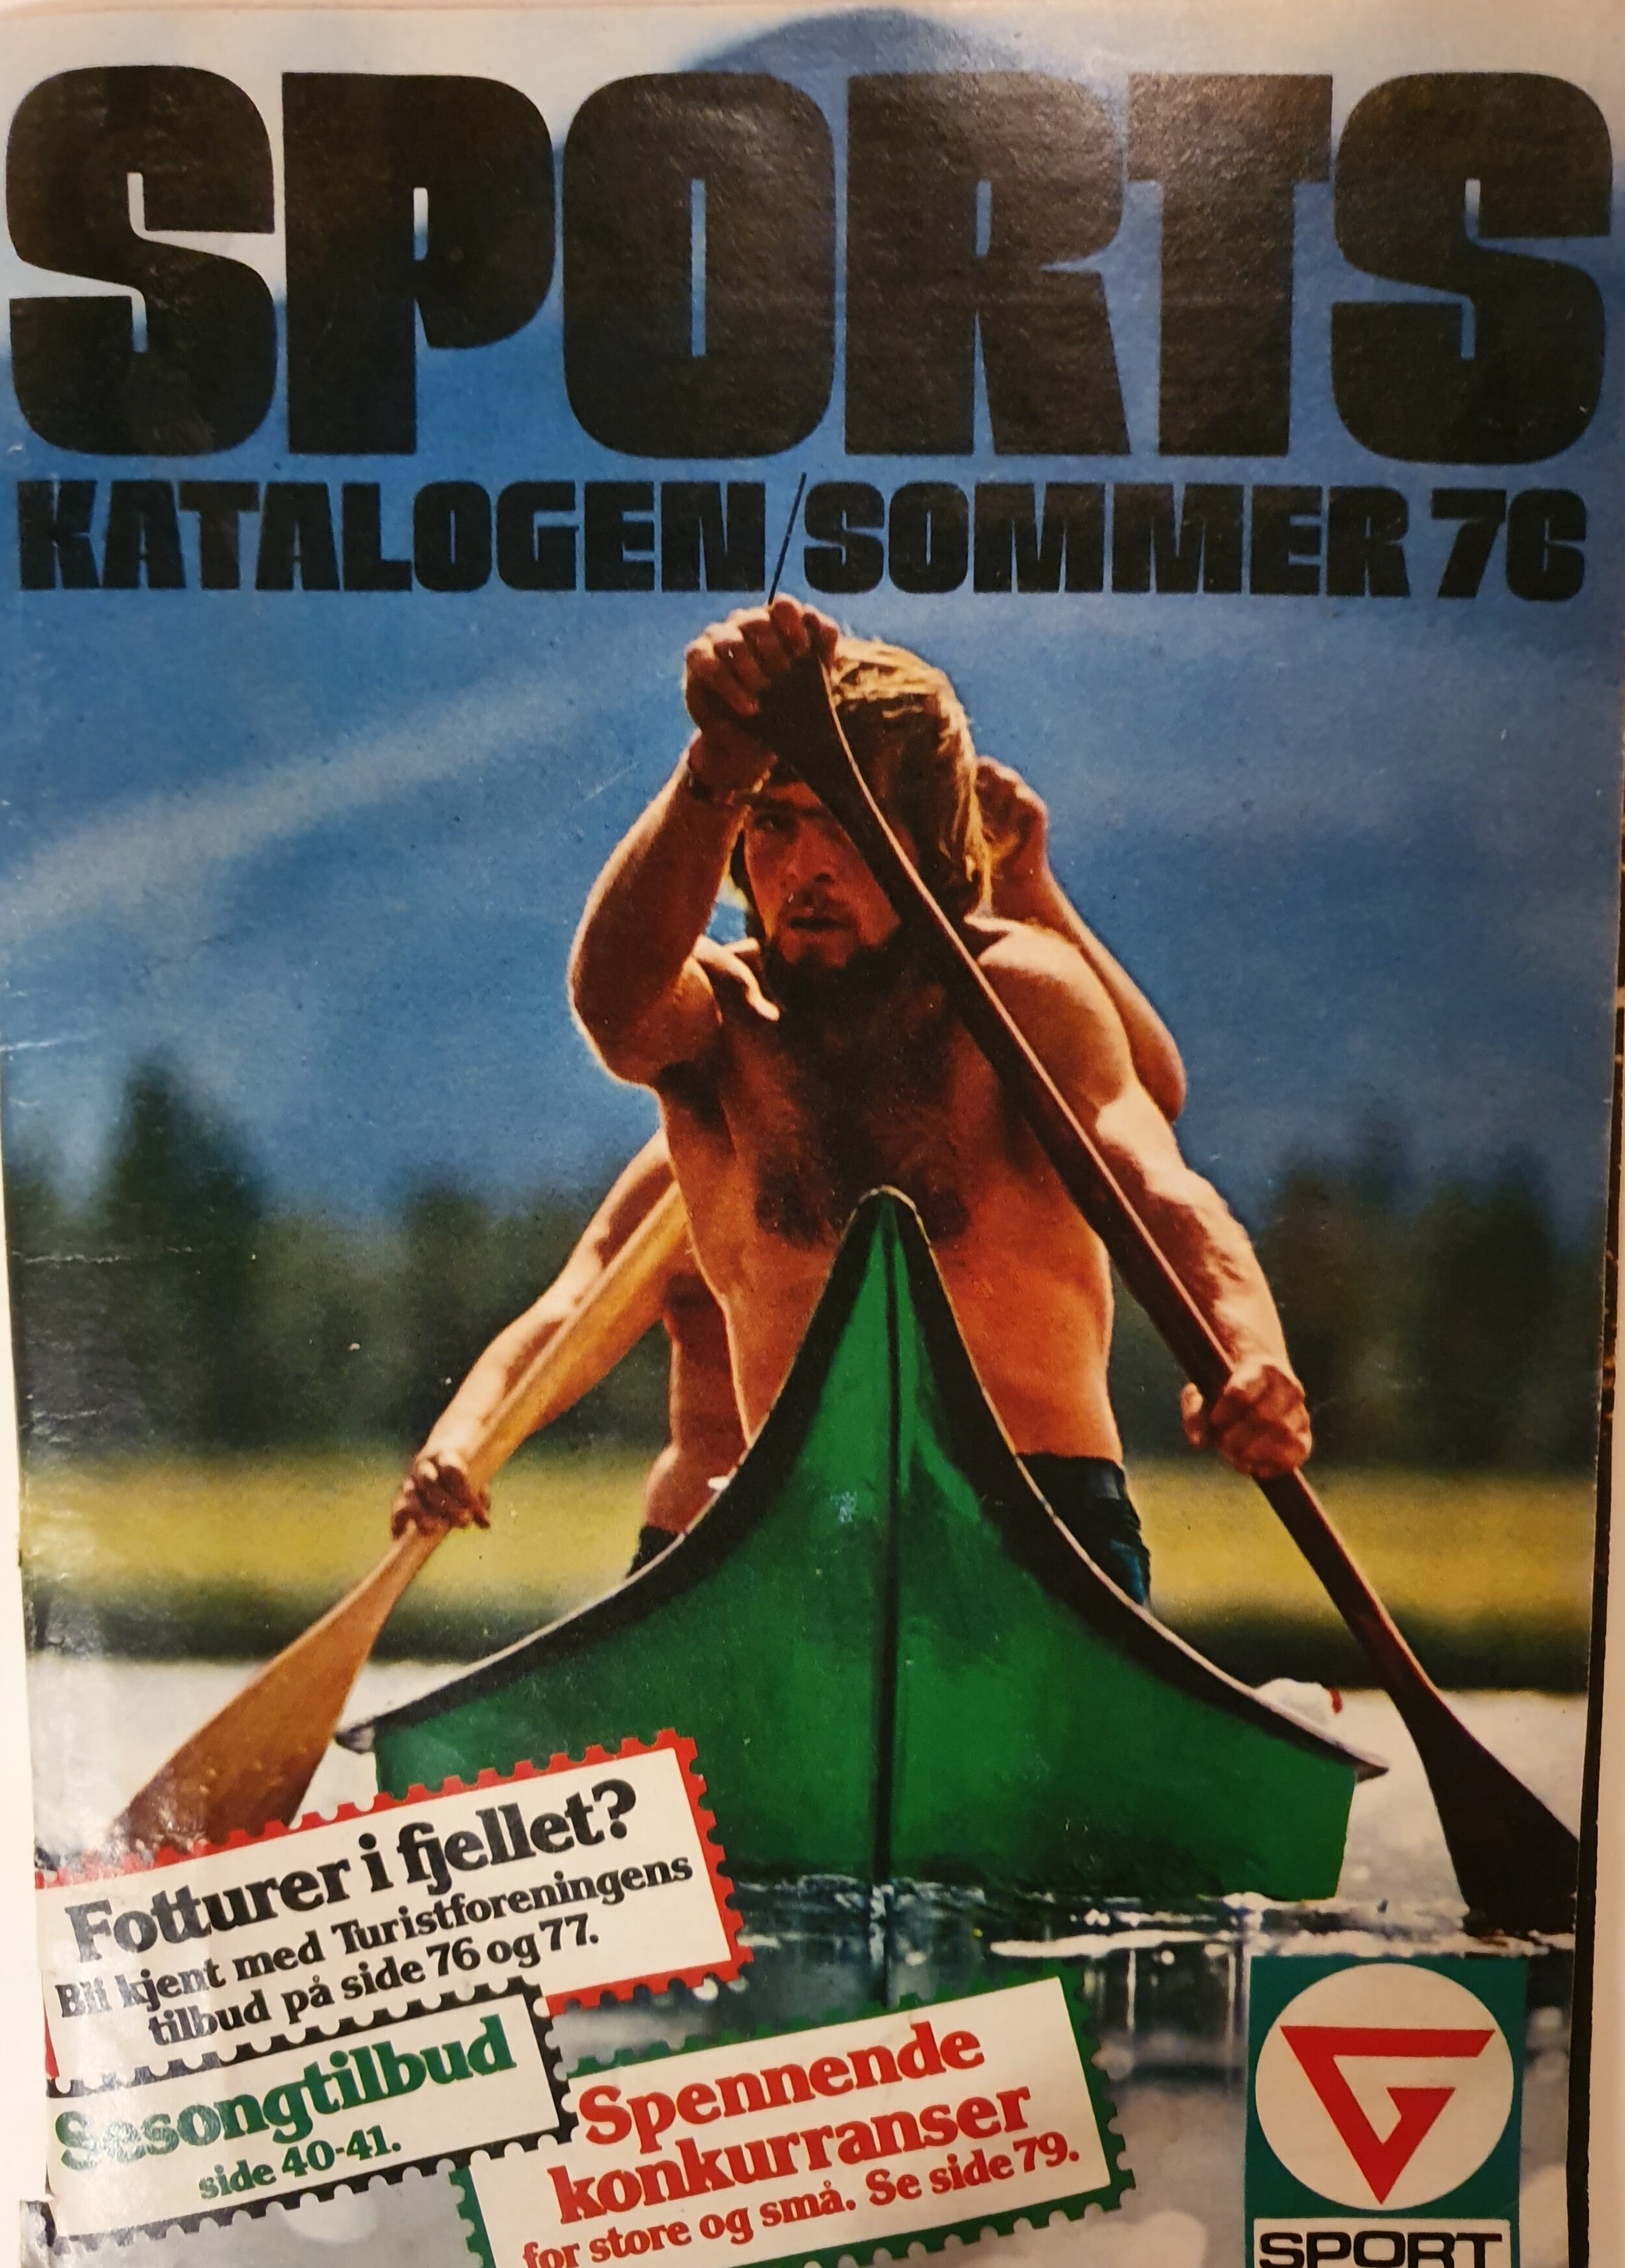  1976. Bengt on front page, sports magazine 